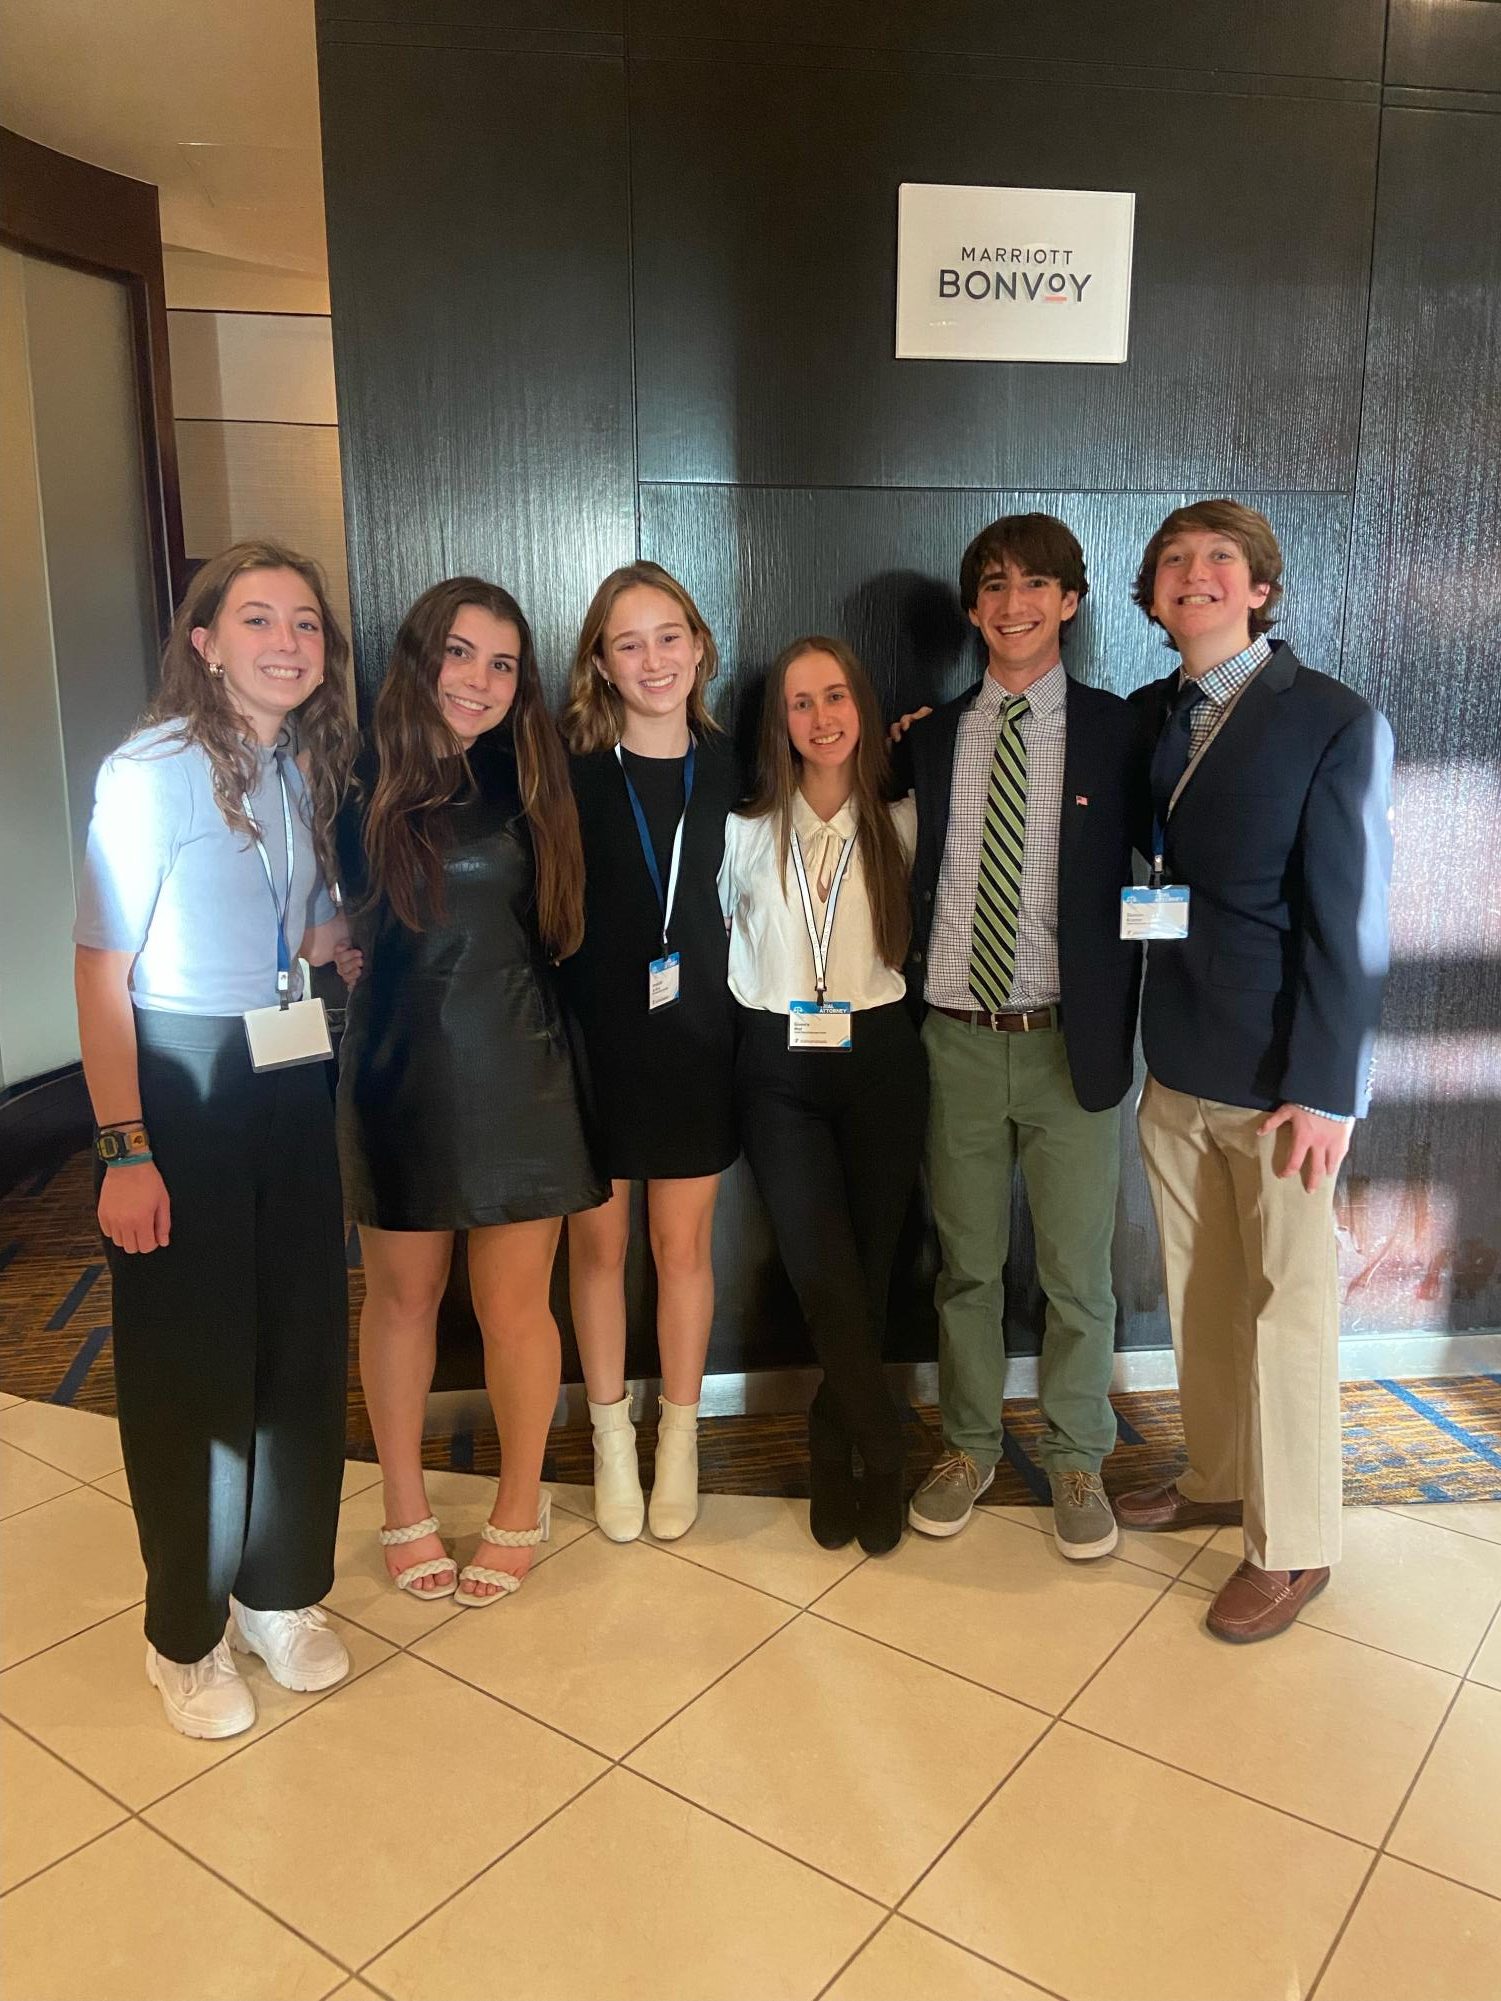 The 2022 Outstanding Attorney Team. From left: Pera Roberts, Addie Claire Jones, Annabelle De Brux, Ginevra Mor, Elijah Butcher, and Dodson Kramer. Not pictured: Linda Rogers